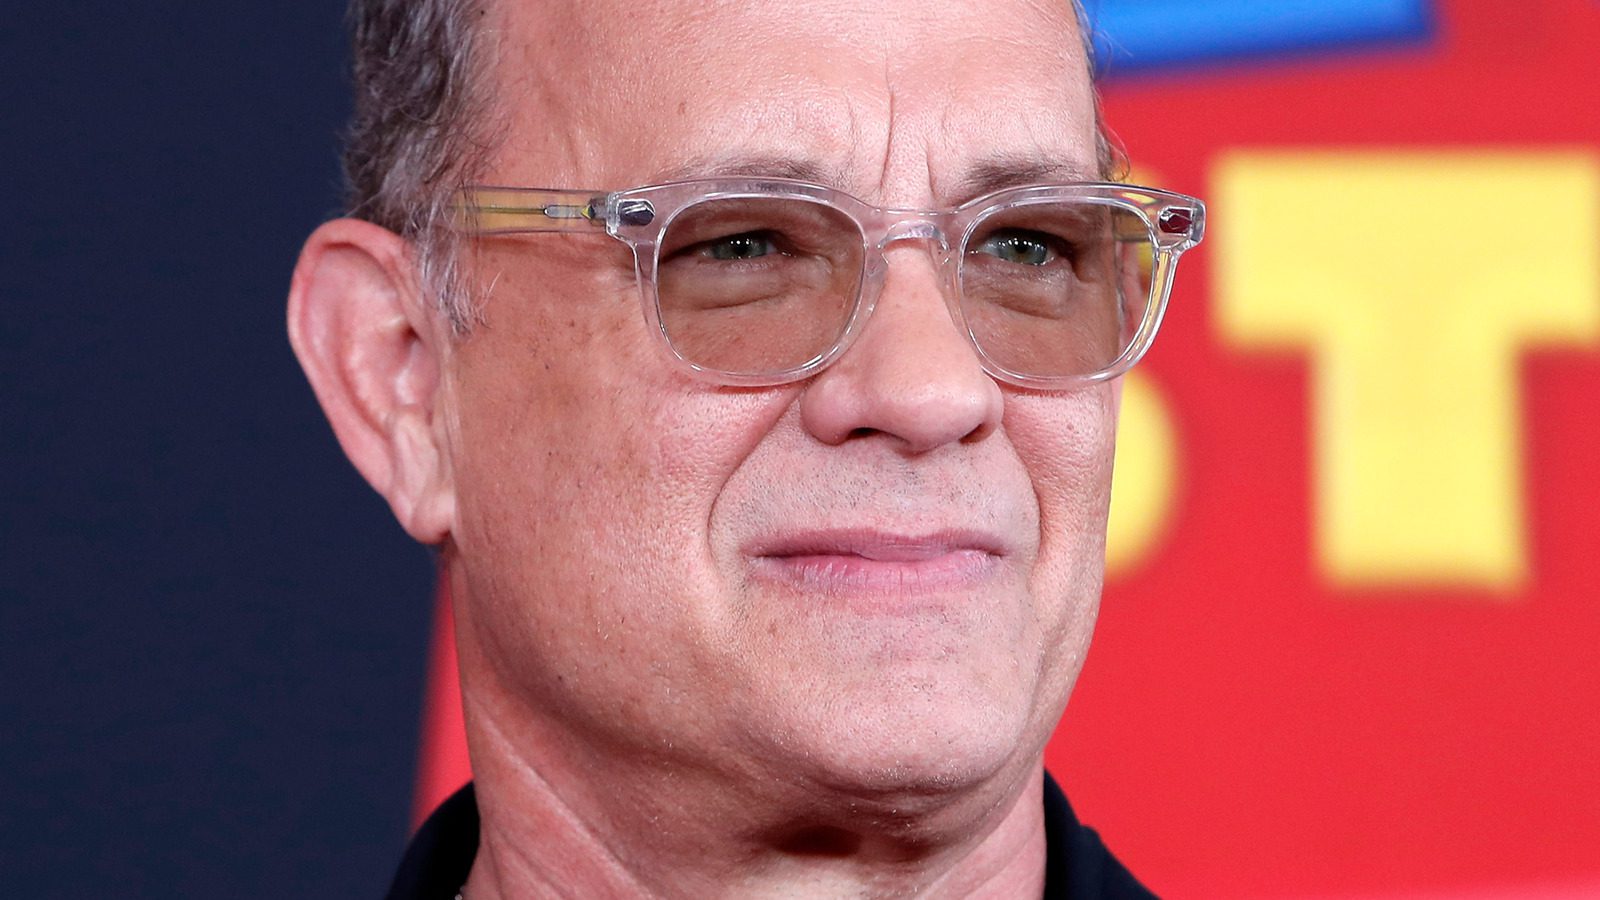 Tom Hanks Confirmed What We Suspected About Why He Accepted His Toy Story Role